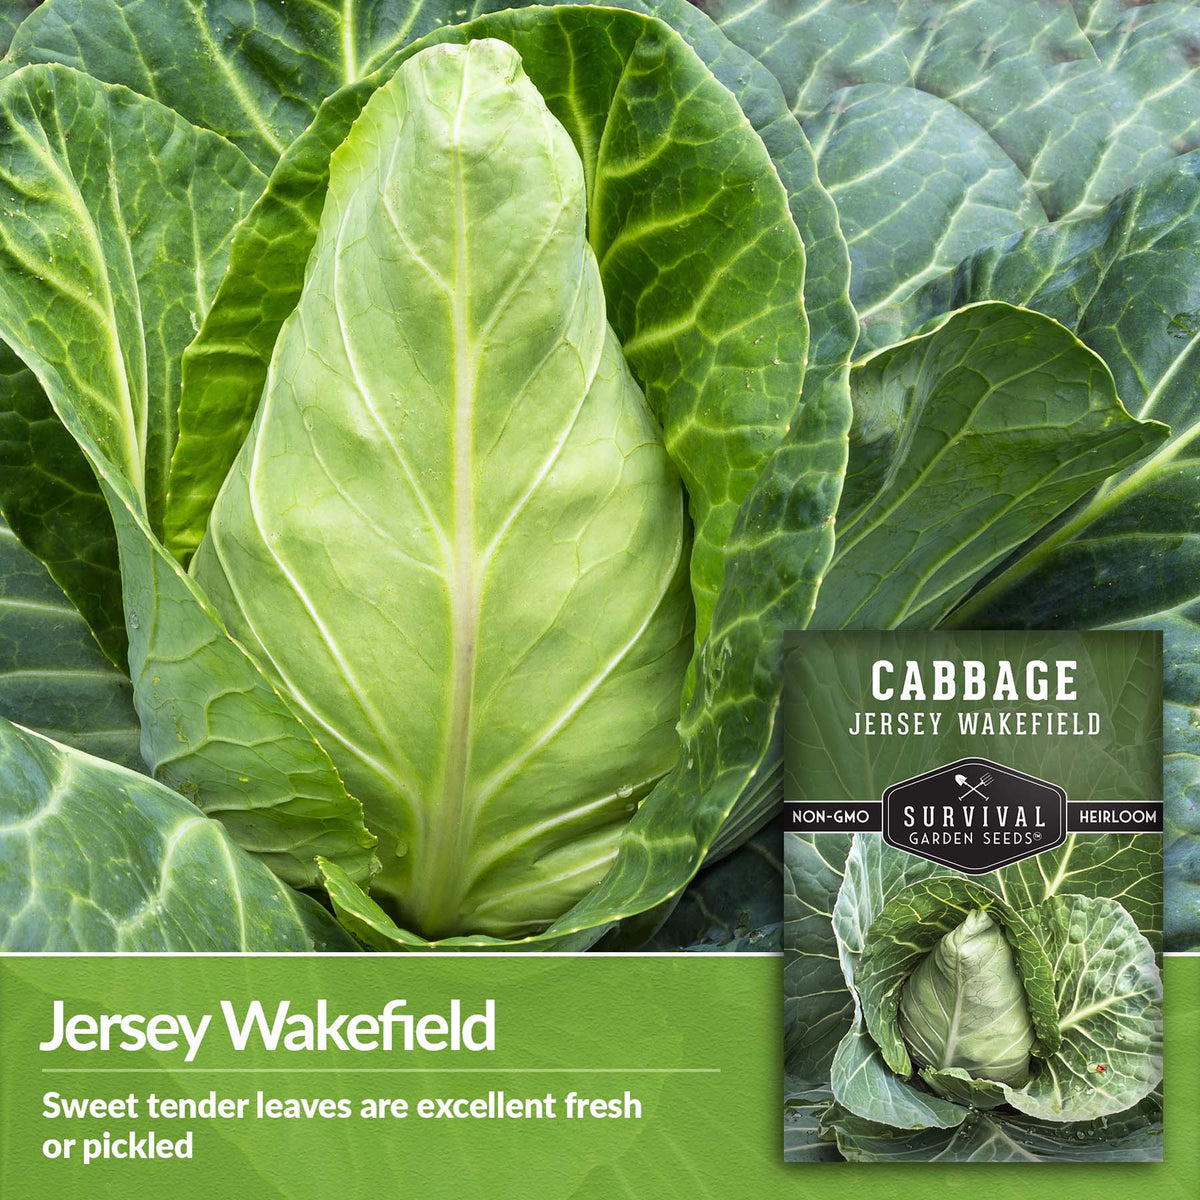 Jersey Wakefield cabbage leaves are excellent fresh or pickled